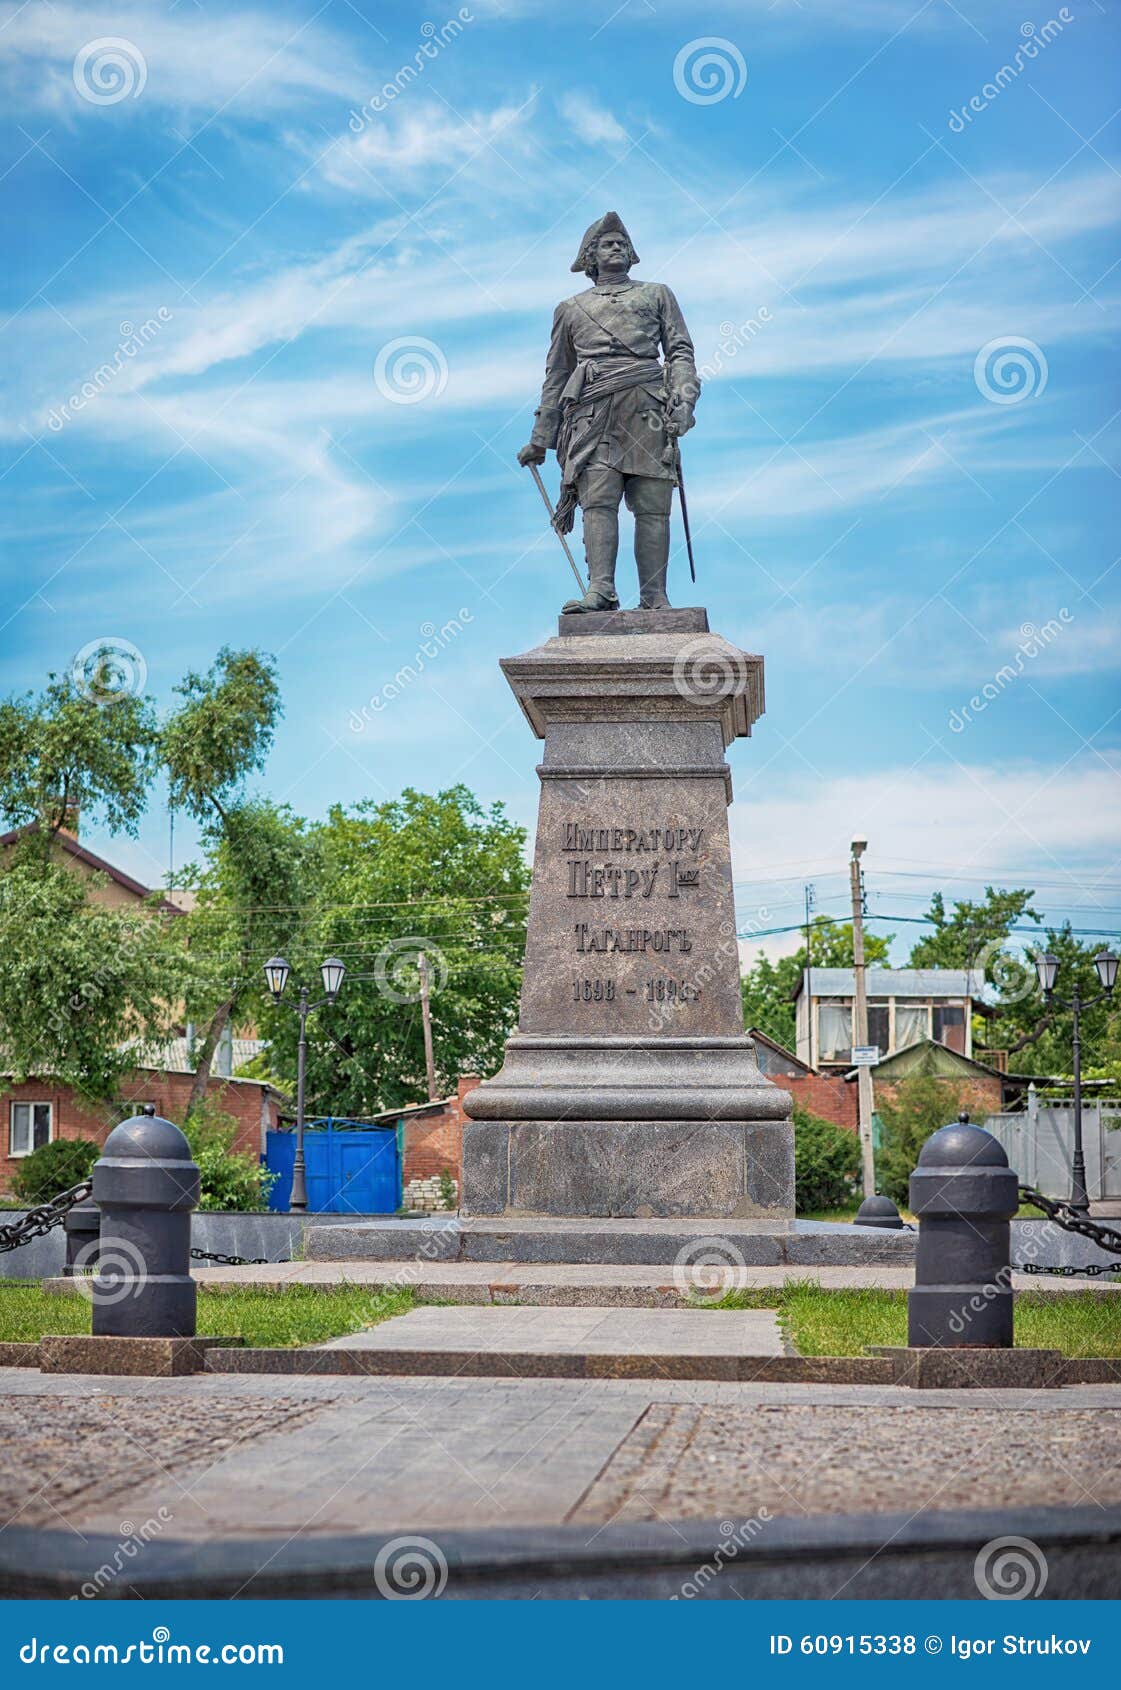 peter the great monument in taganrog, russia